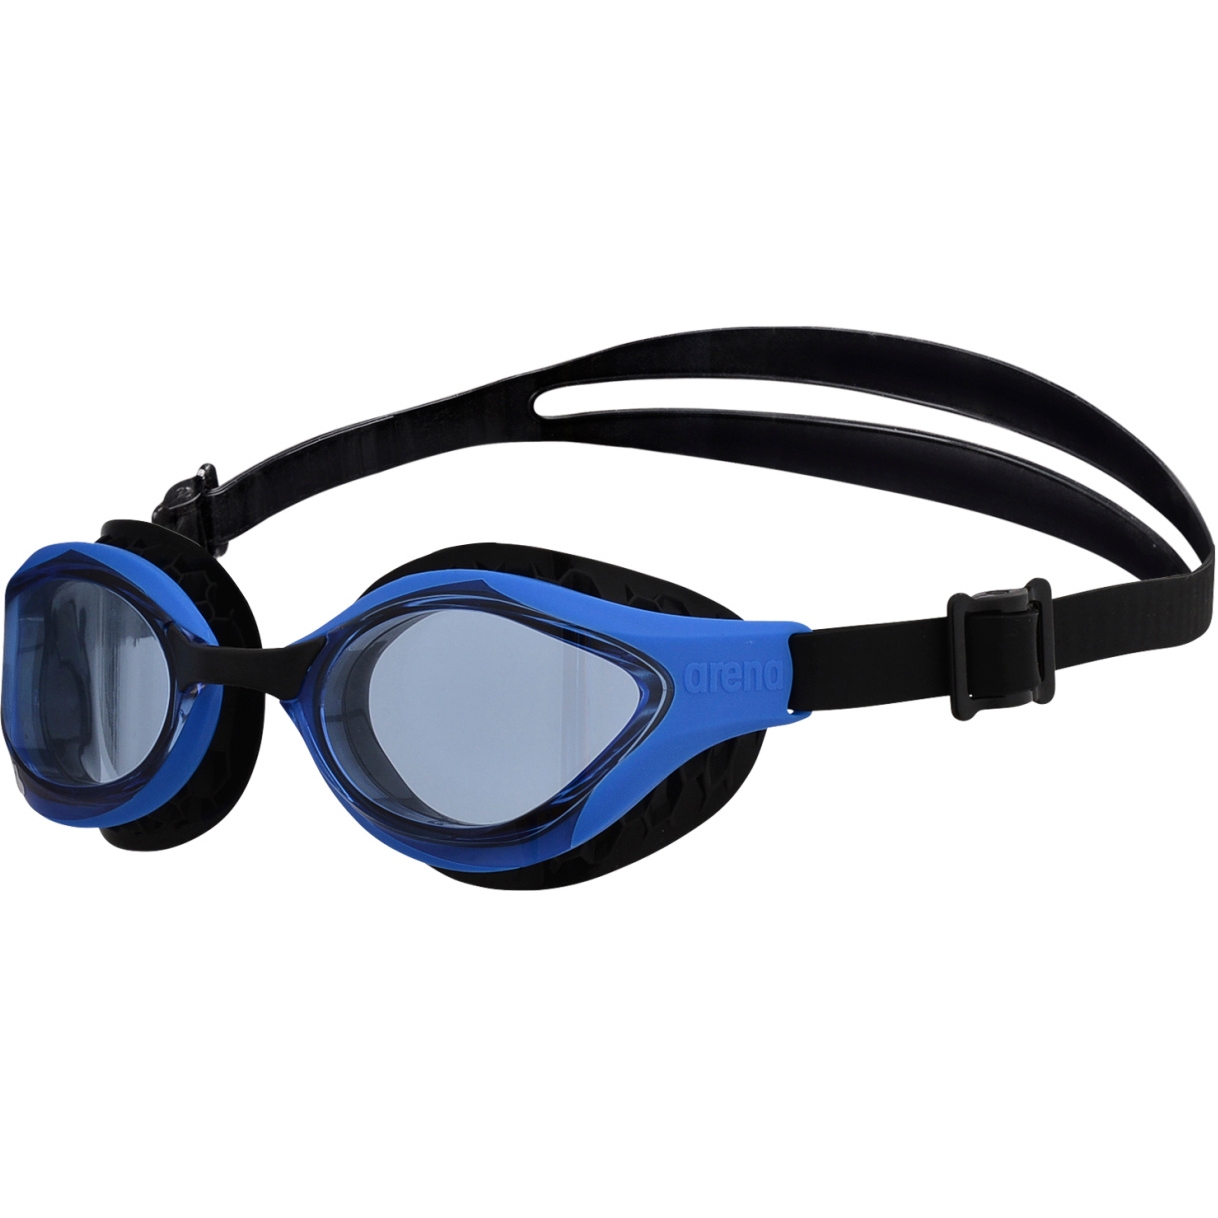 Image of arena Air-Bold Swipe Swimming Goggles - Blue - Blue/Black